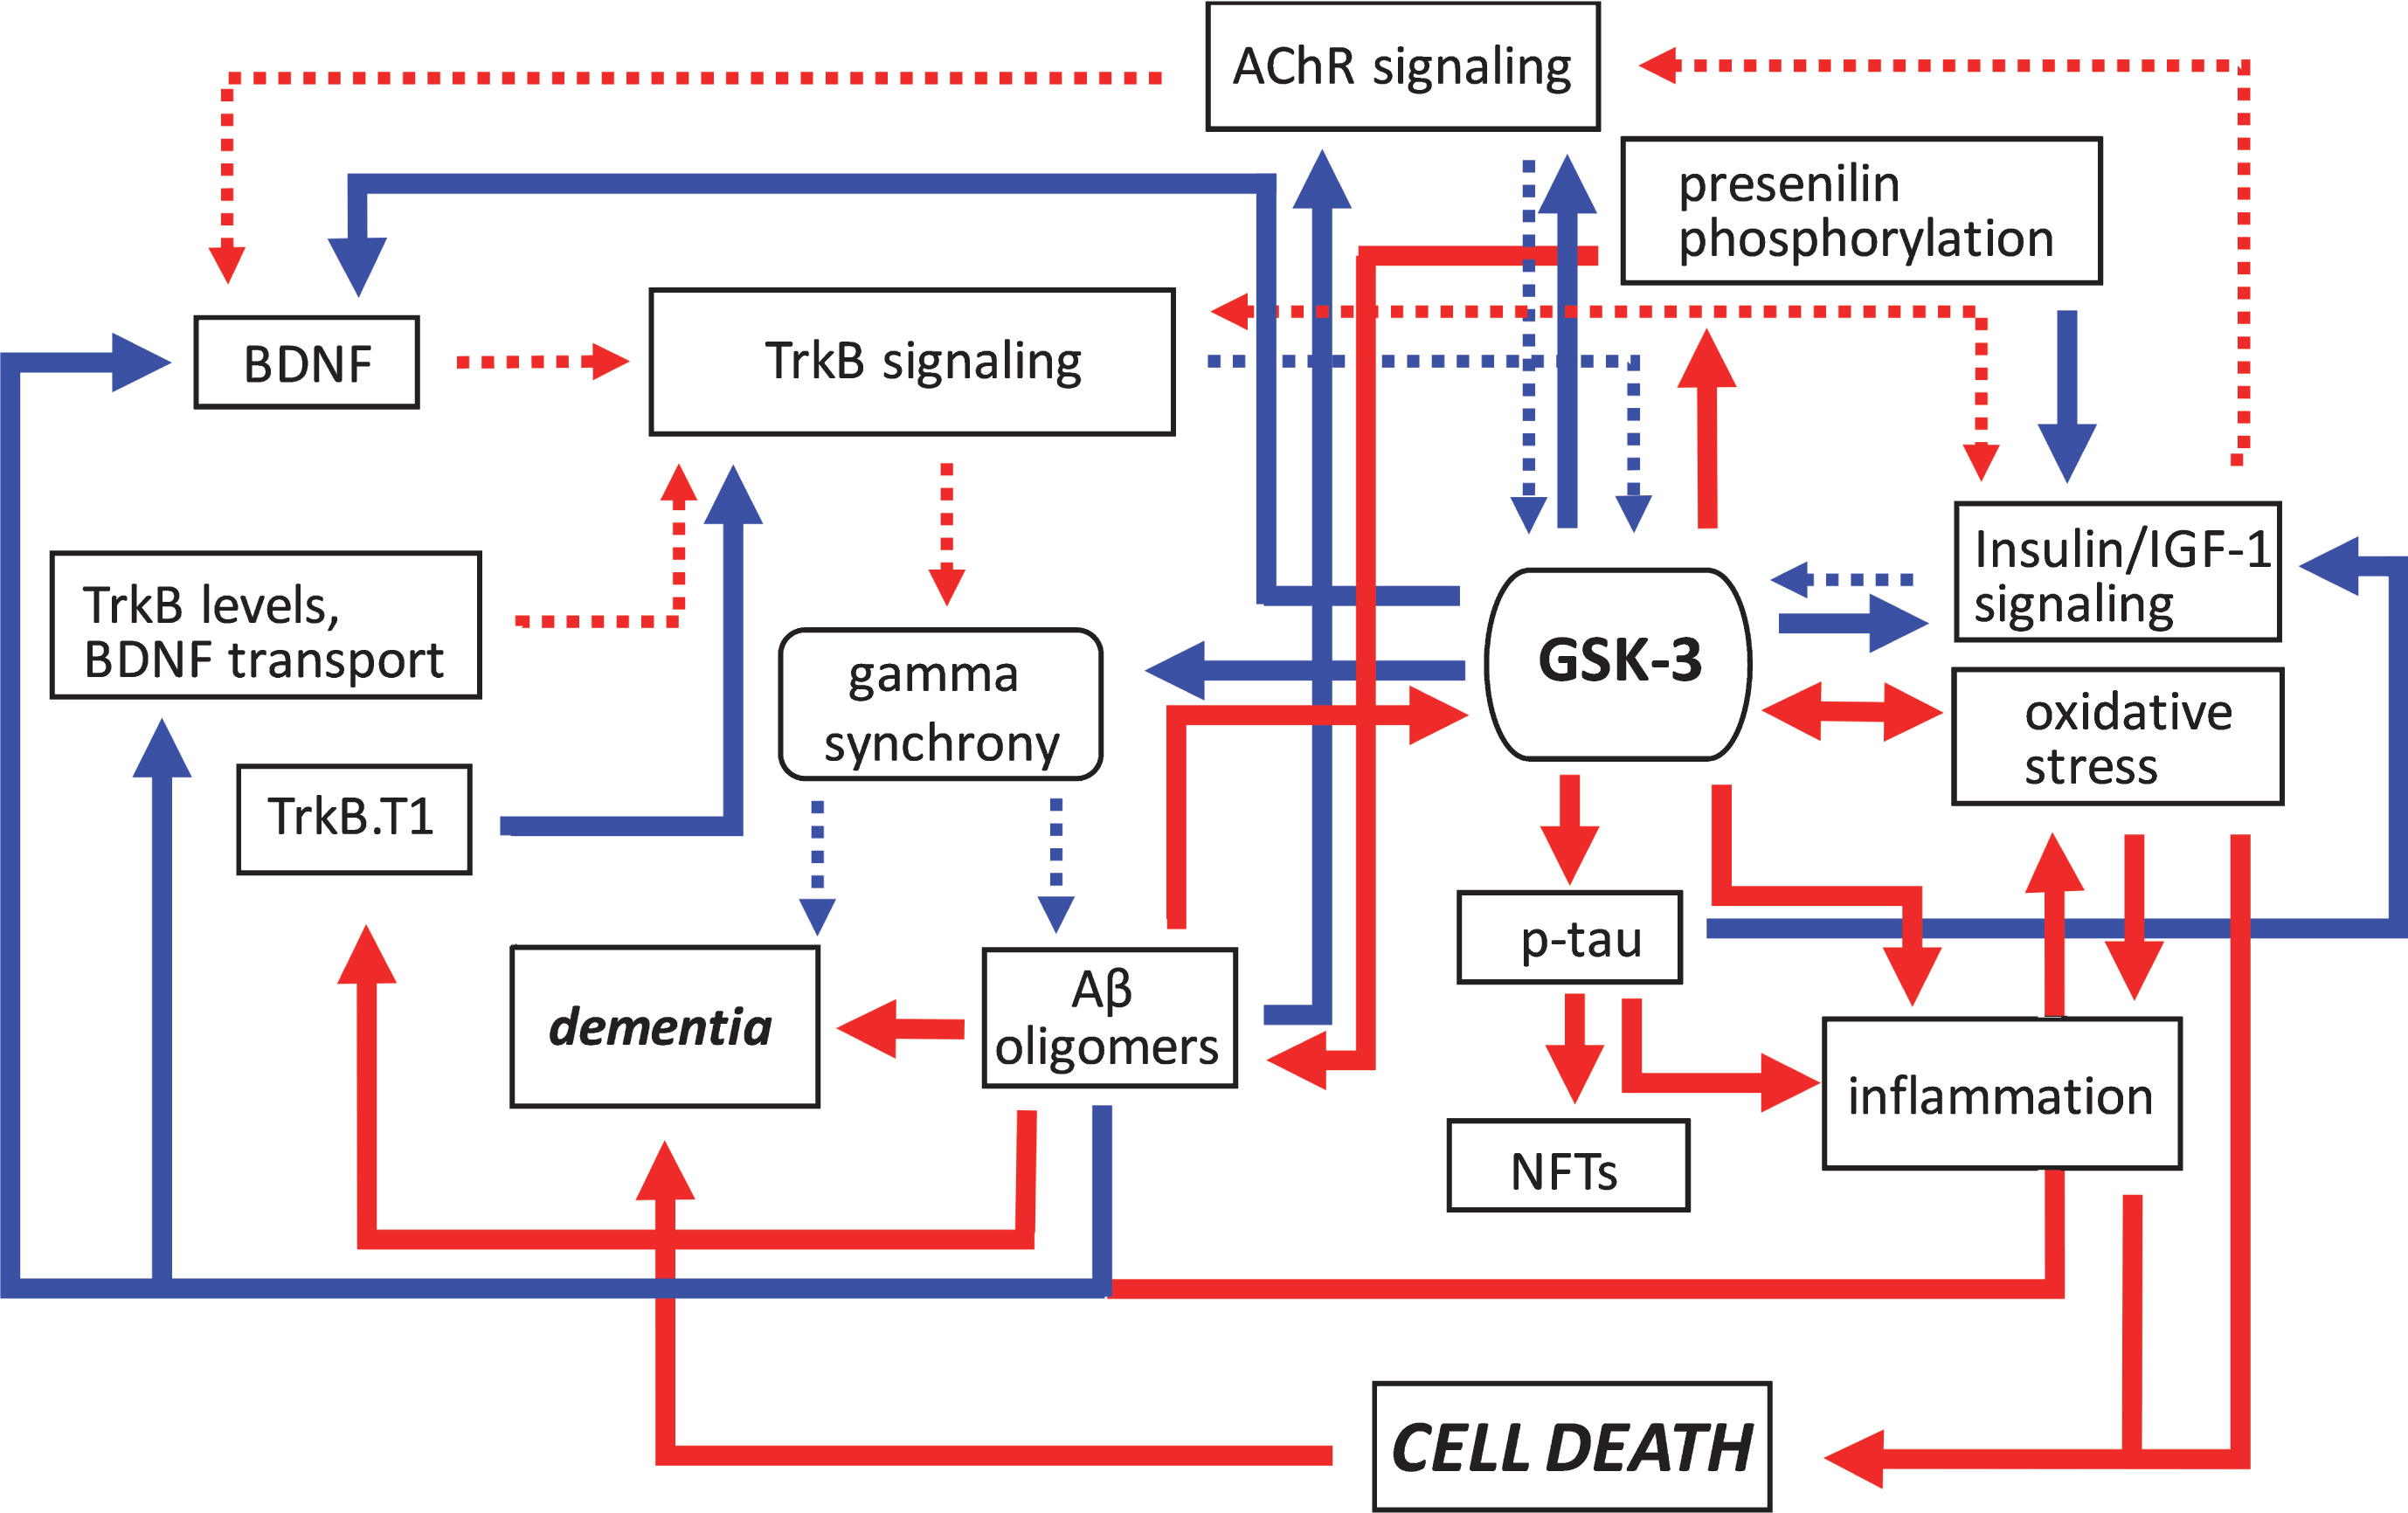 Pathogenic feedforward loops in Alzheimer’s disease converge on GSK-3. In AD, several cellular, and bidirectional, processes work in concert to increase GSK-3 activity. These include deficits in cholinergic, BDNF/TrkB, and insulin or IGF-1 signaling, mitochondrial dysfunction leading to oxidative stress, and production of Aβ oligomers. This increase in GSK-3 activity further suppresses cholinergic, BDNF/TrkB, and the insulin/IGF-1 signaling pathways, and additionally promotes tau hyperphosphorylation and inflammation, and the disruption of gamma synchrony. The production of Aβ oligomers also increases due to GSK-3-mediated presenilin phosphorylation. Together these processes contribute to the onset of dementia. Positive regulation (red arrows) and negative regulation (blue arrows) of each pathway and/or process are shown. Changes in the overall activity of these pathways compared to normal conditions are represented by the solid arrows (increased activation) and dotted arrows (decreased activation). Aβ, amyloid-β; AChR, acetylcholine receptor; BDNF, brain-derived neurotrophic factor; GSK-3β, glycogen synthase kinase-3β; IGF-1, insulin growth factor 1; NFTs, neurofibrillary tangles; TrkB, tropomyosin receptor kinase B; TrkB.T1, truncated tropomyosin receptor kinase.